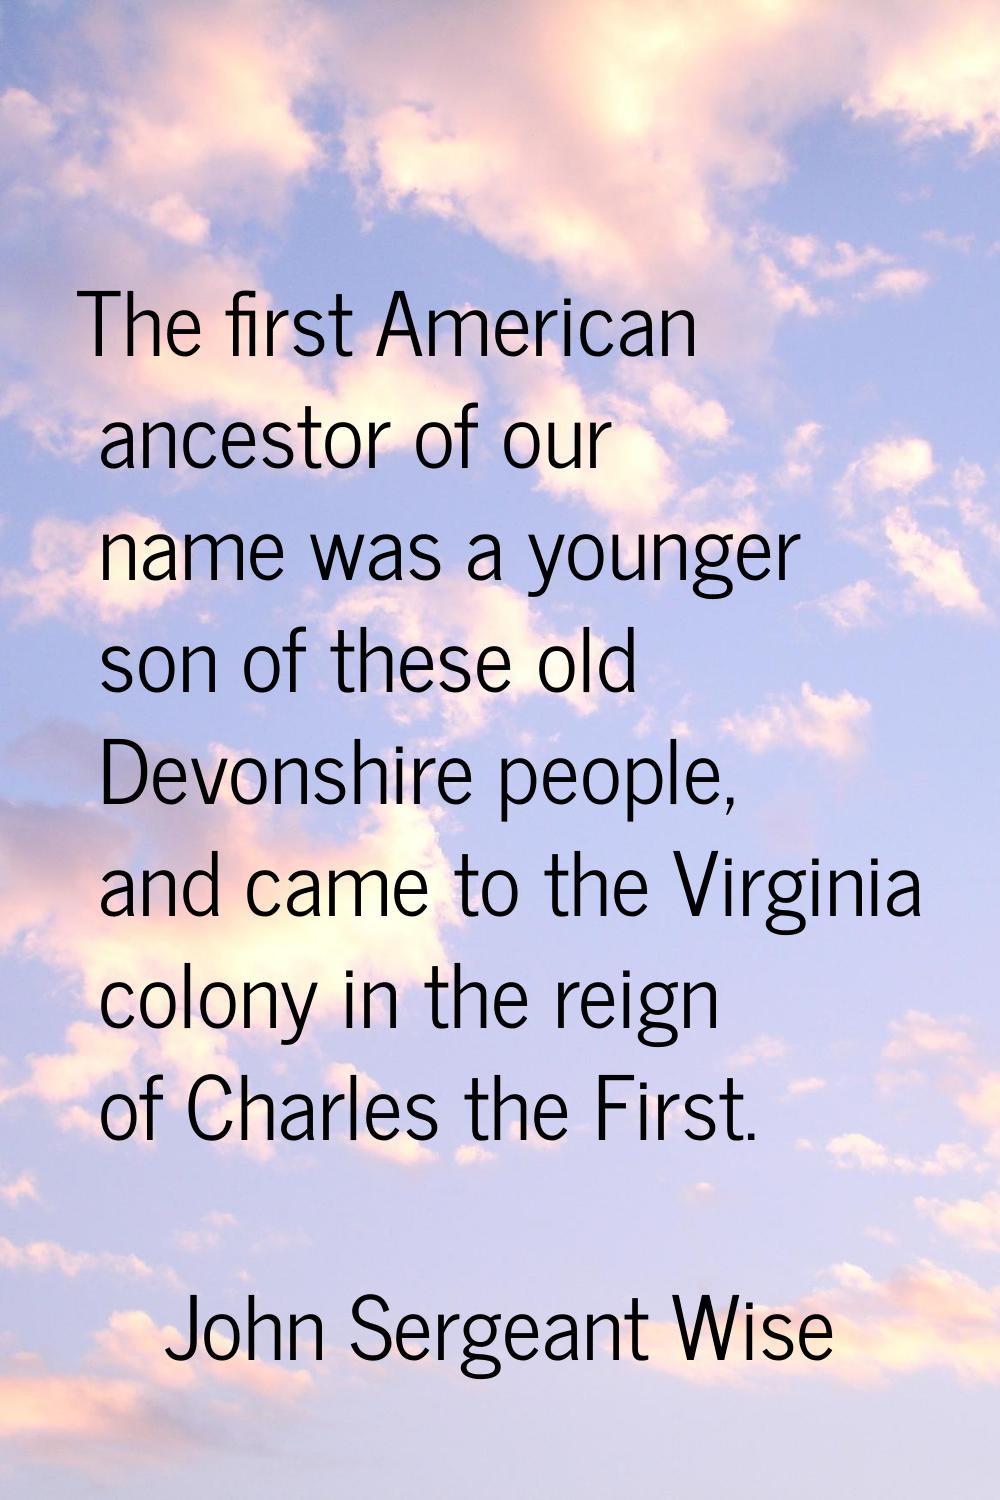 The first American ancestor of our name was a younger son of these old Devonshire people, and came 